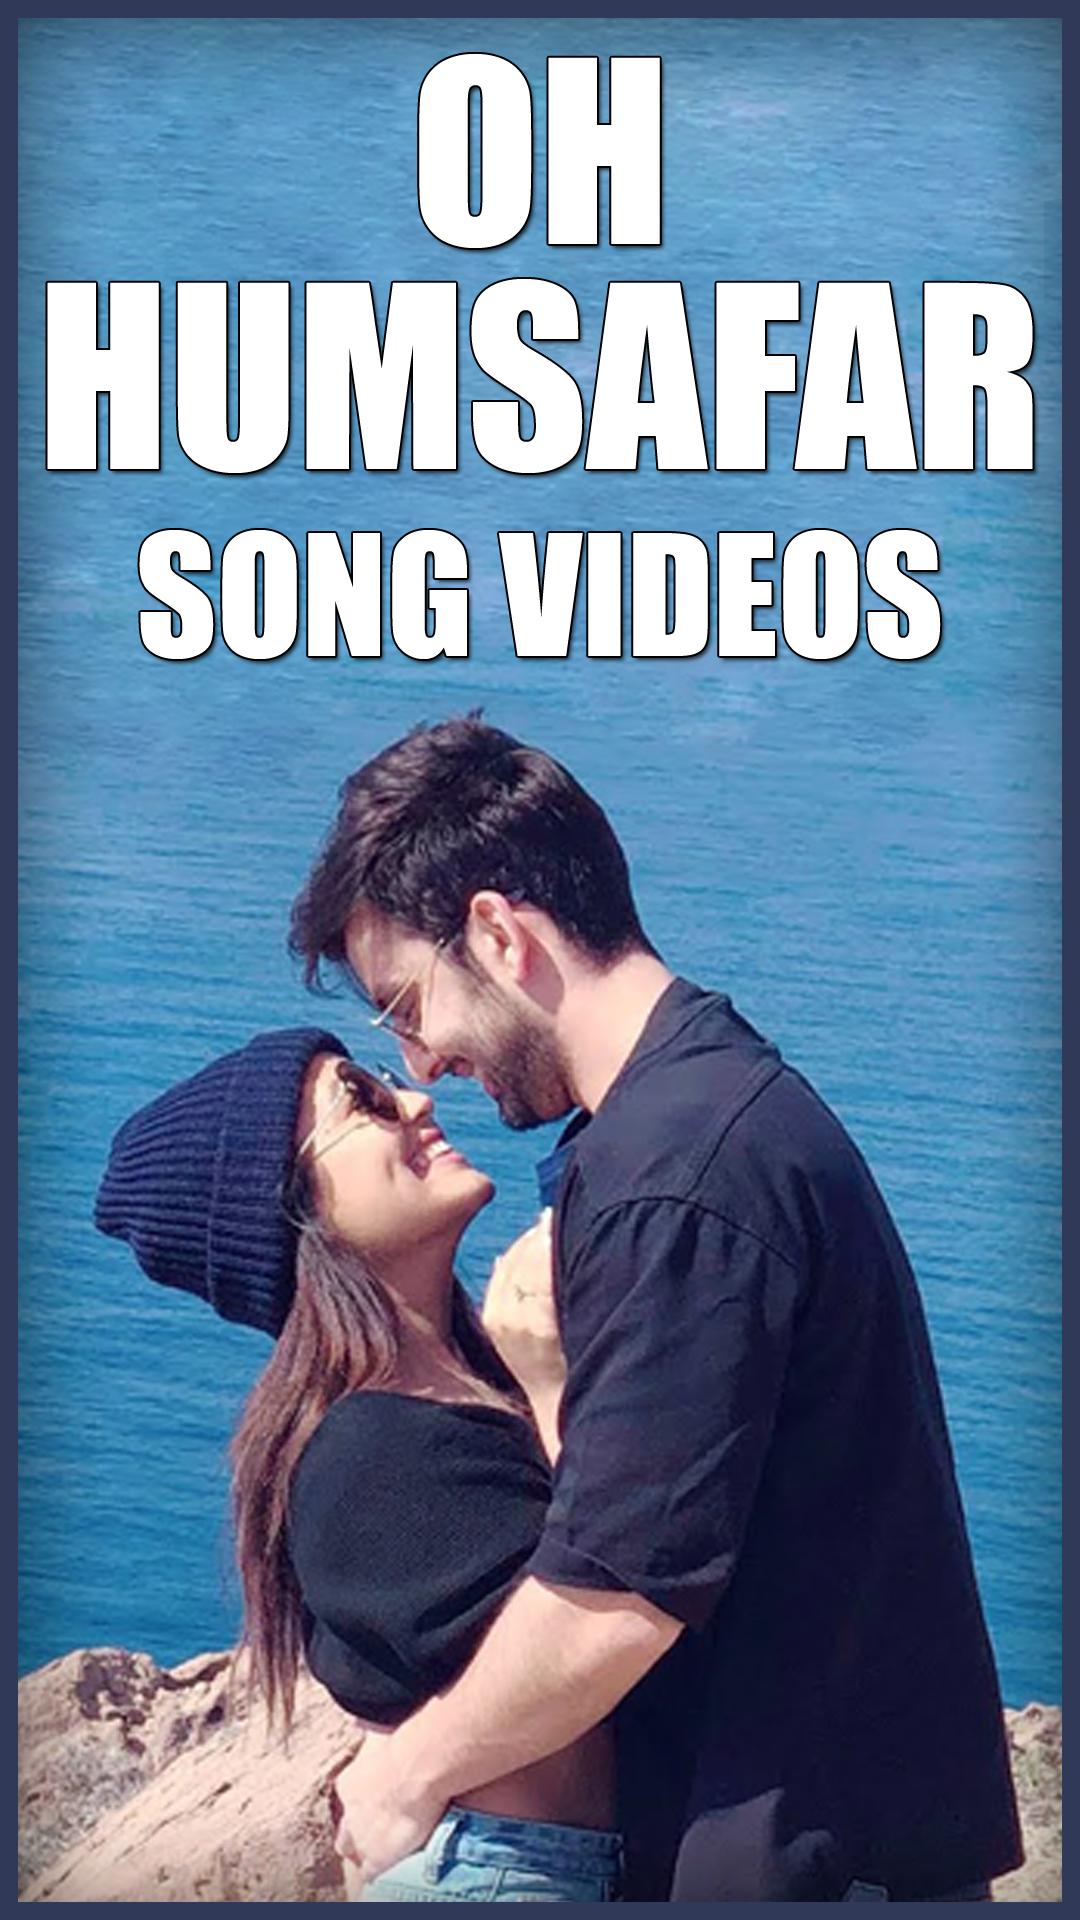 Oh humsafar song download video